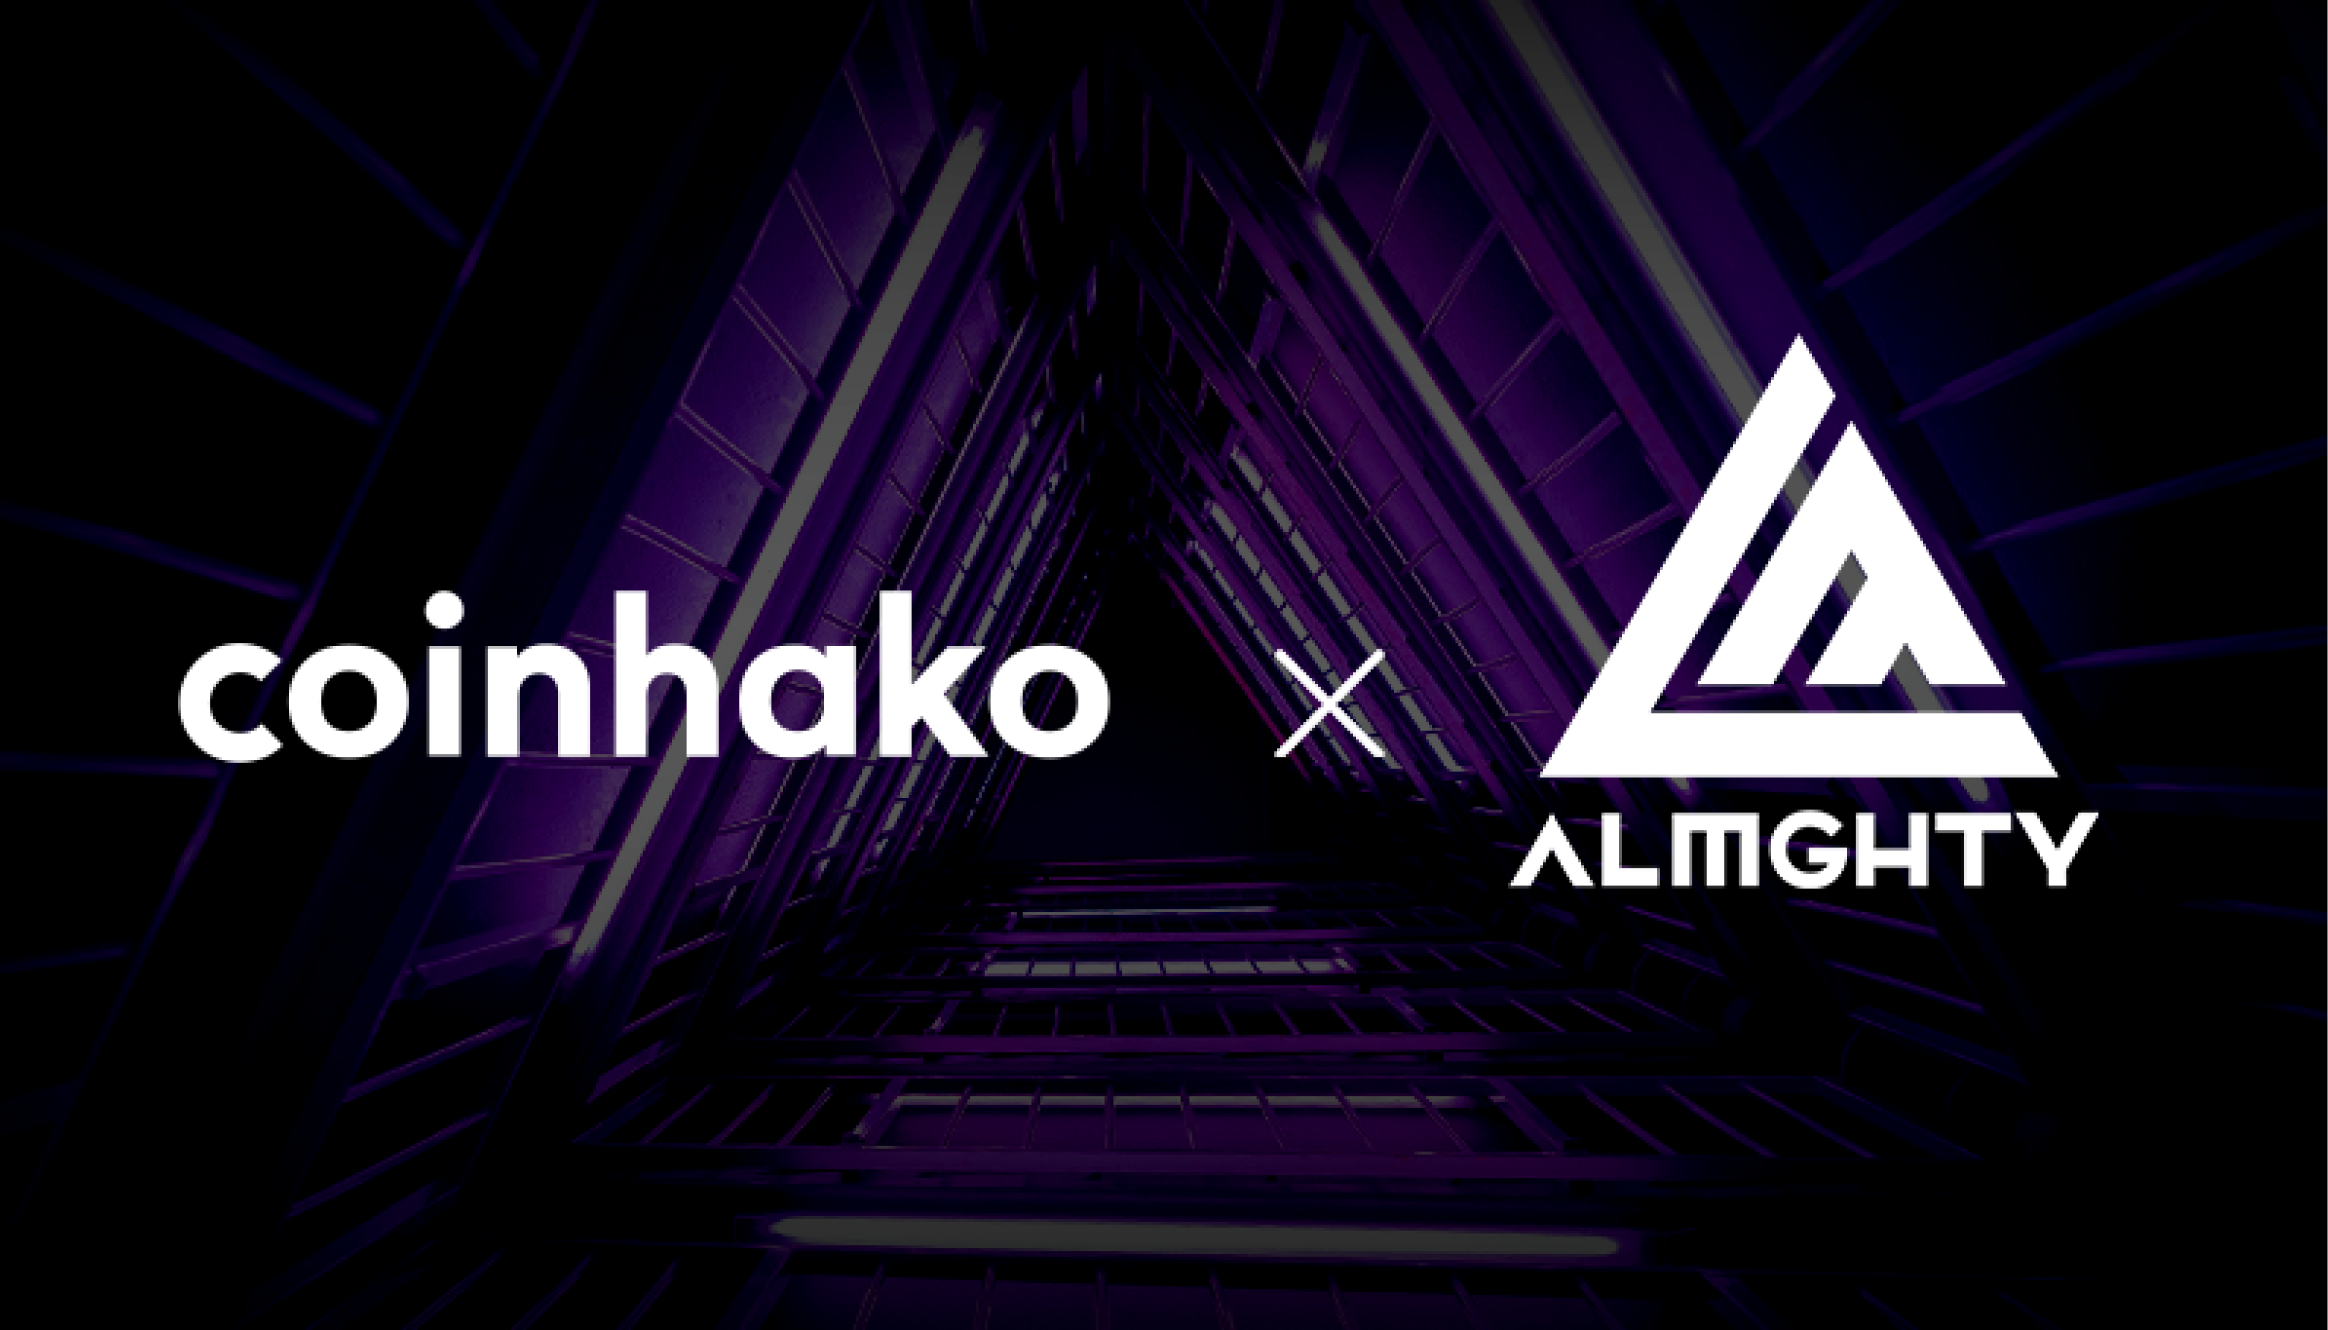 Coinhako Kicks Off First Ethereum-Funded Esports Sponsorship in Singapore with Team ALMGHTY